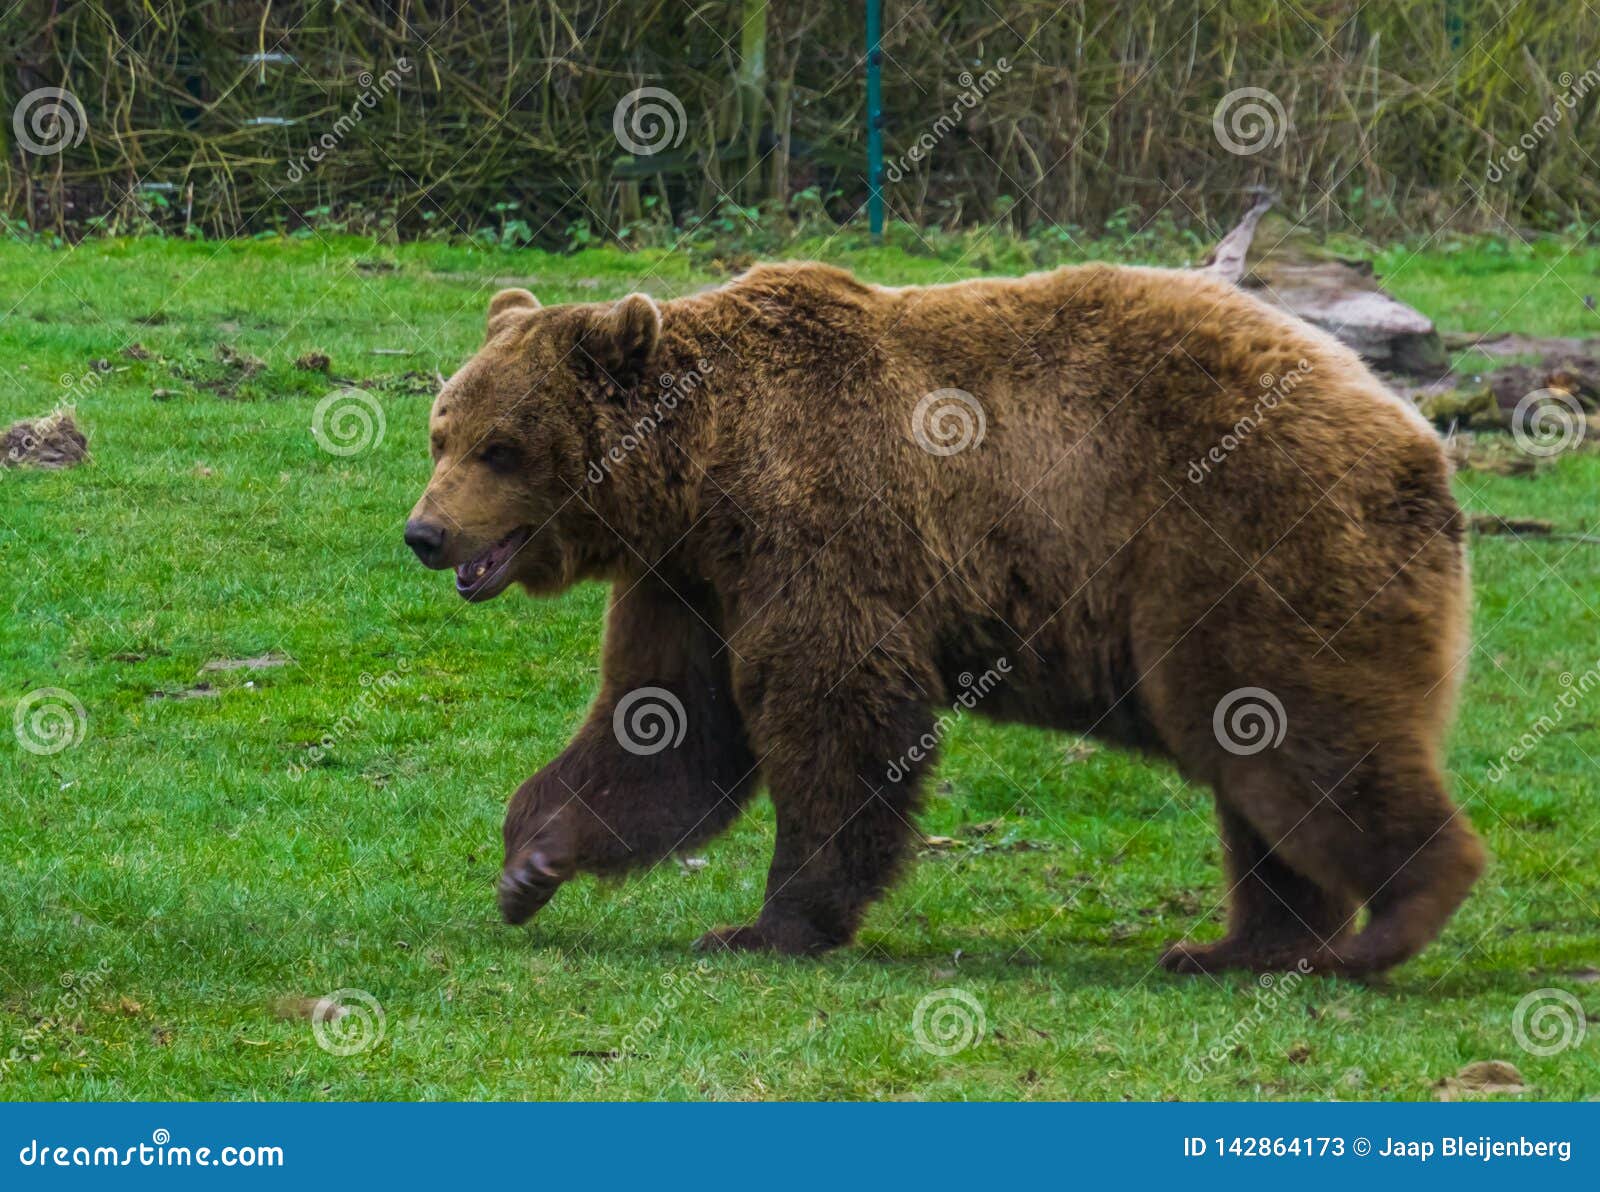 Brown Bear Walking through the Grass, Common Animal in Eurasia and North  America, Popular Zoo Animals Stock Image - Image of land, asian: 142864173